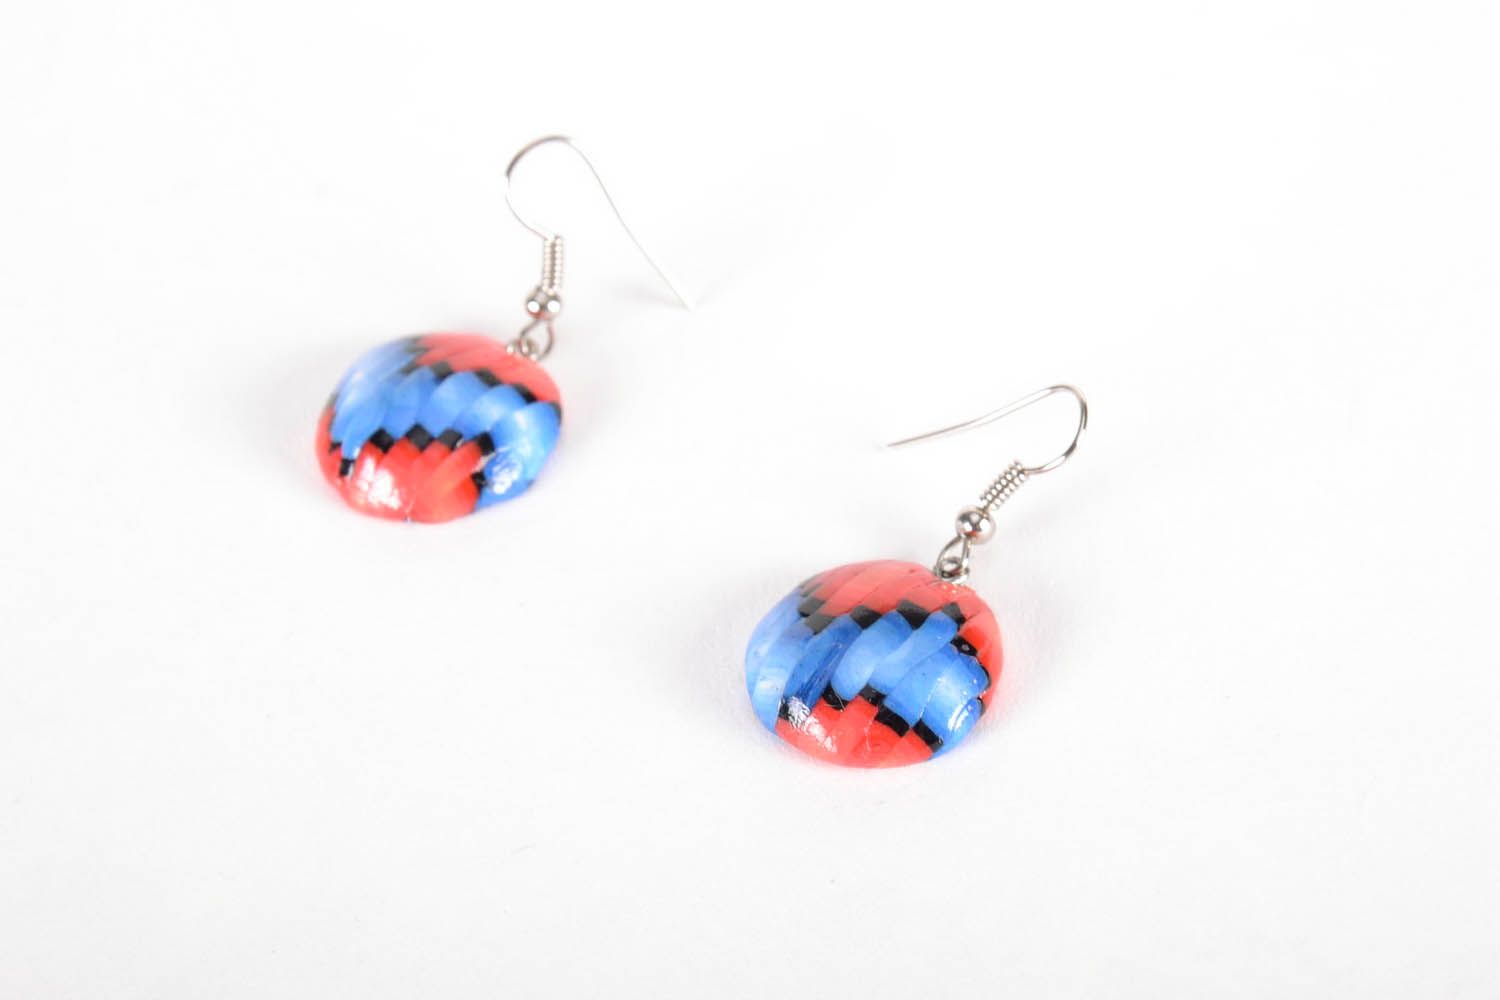 Earrings made using bargello technique photo 1